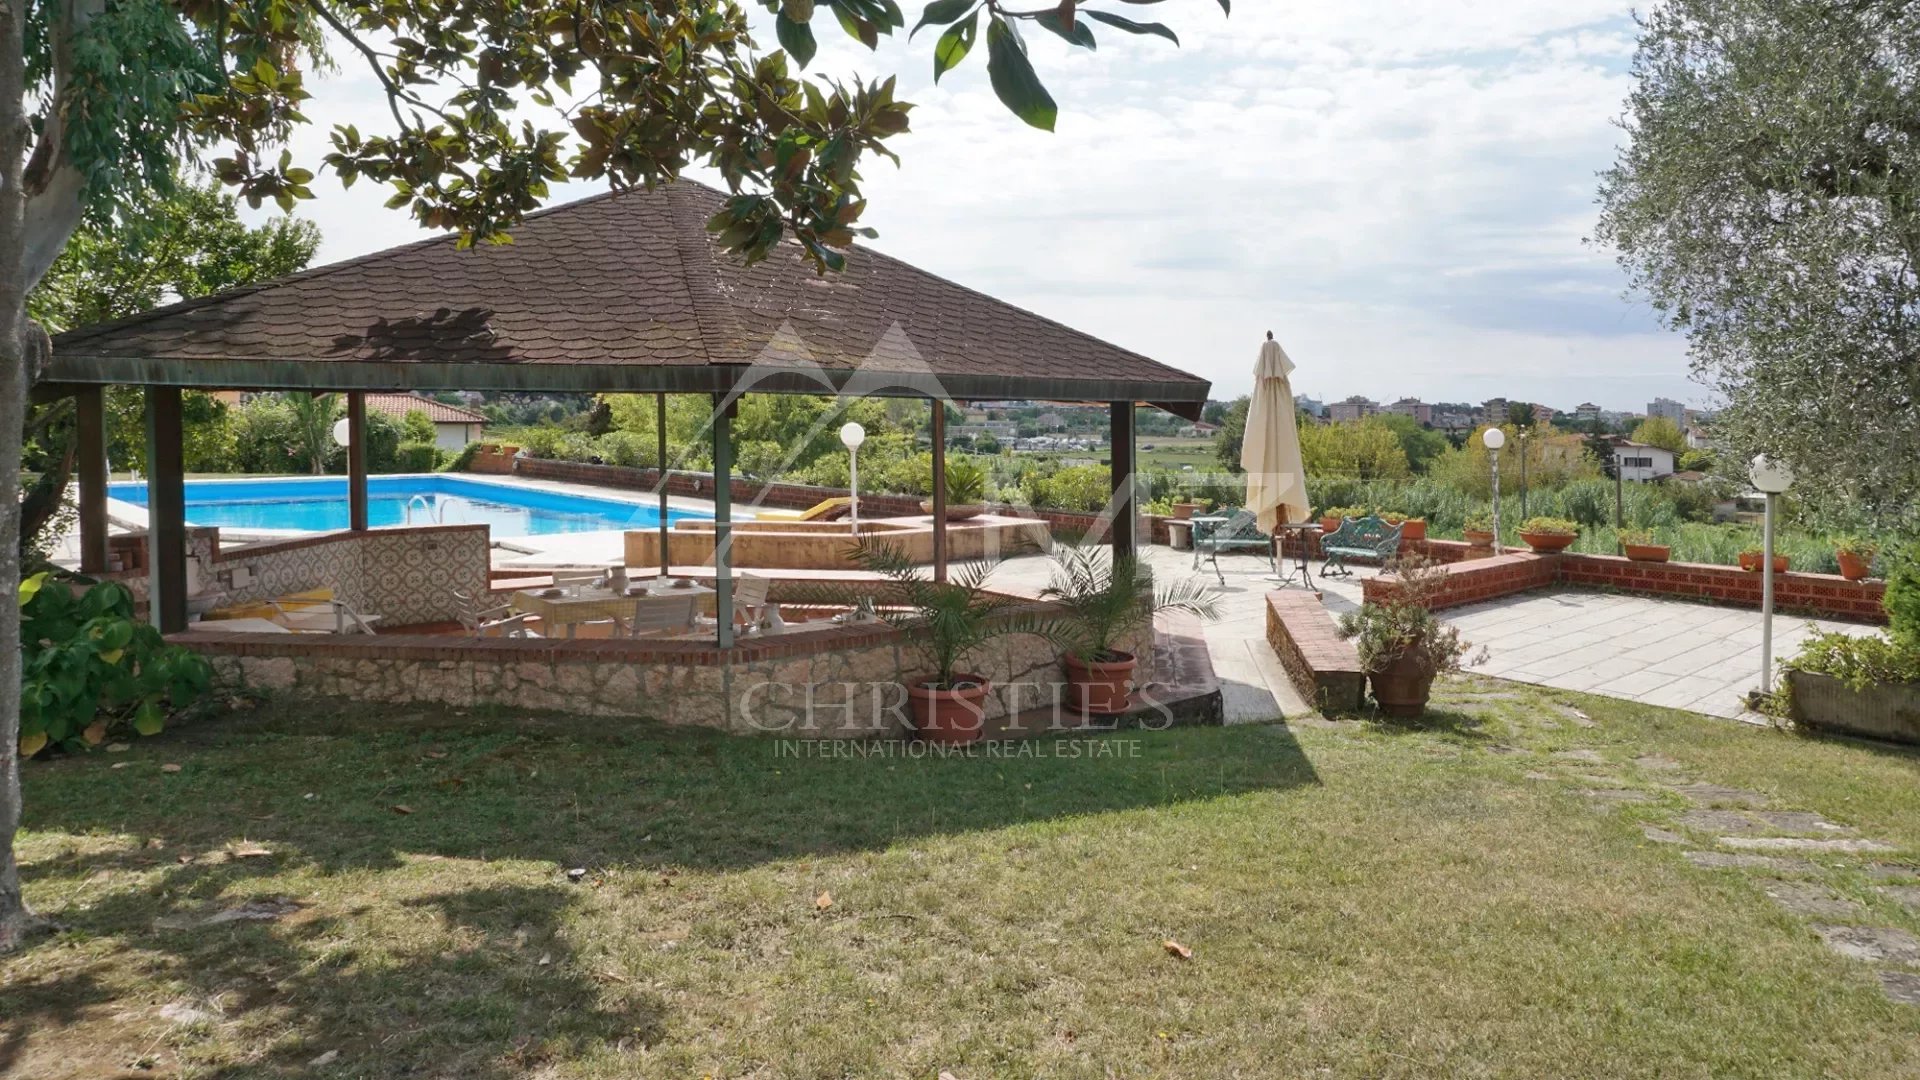 Elegant villa with swimming pool, vineyard and large land a short distance from the sea